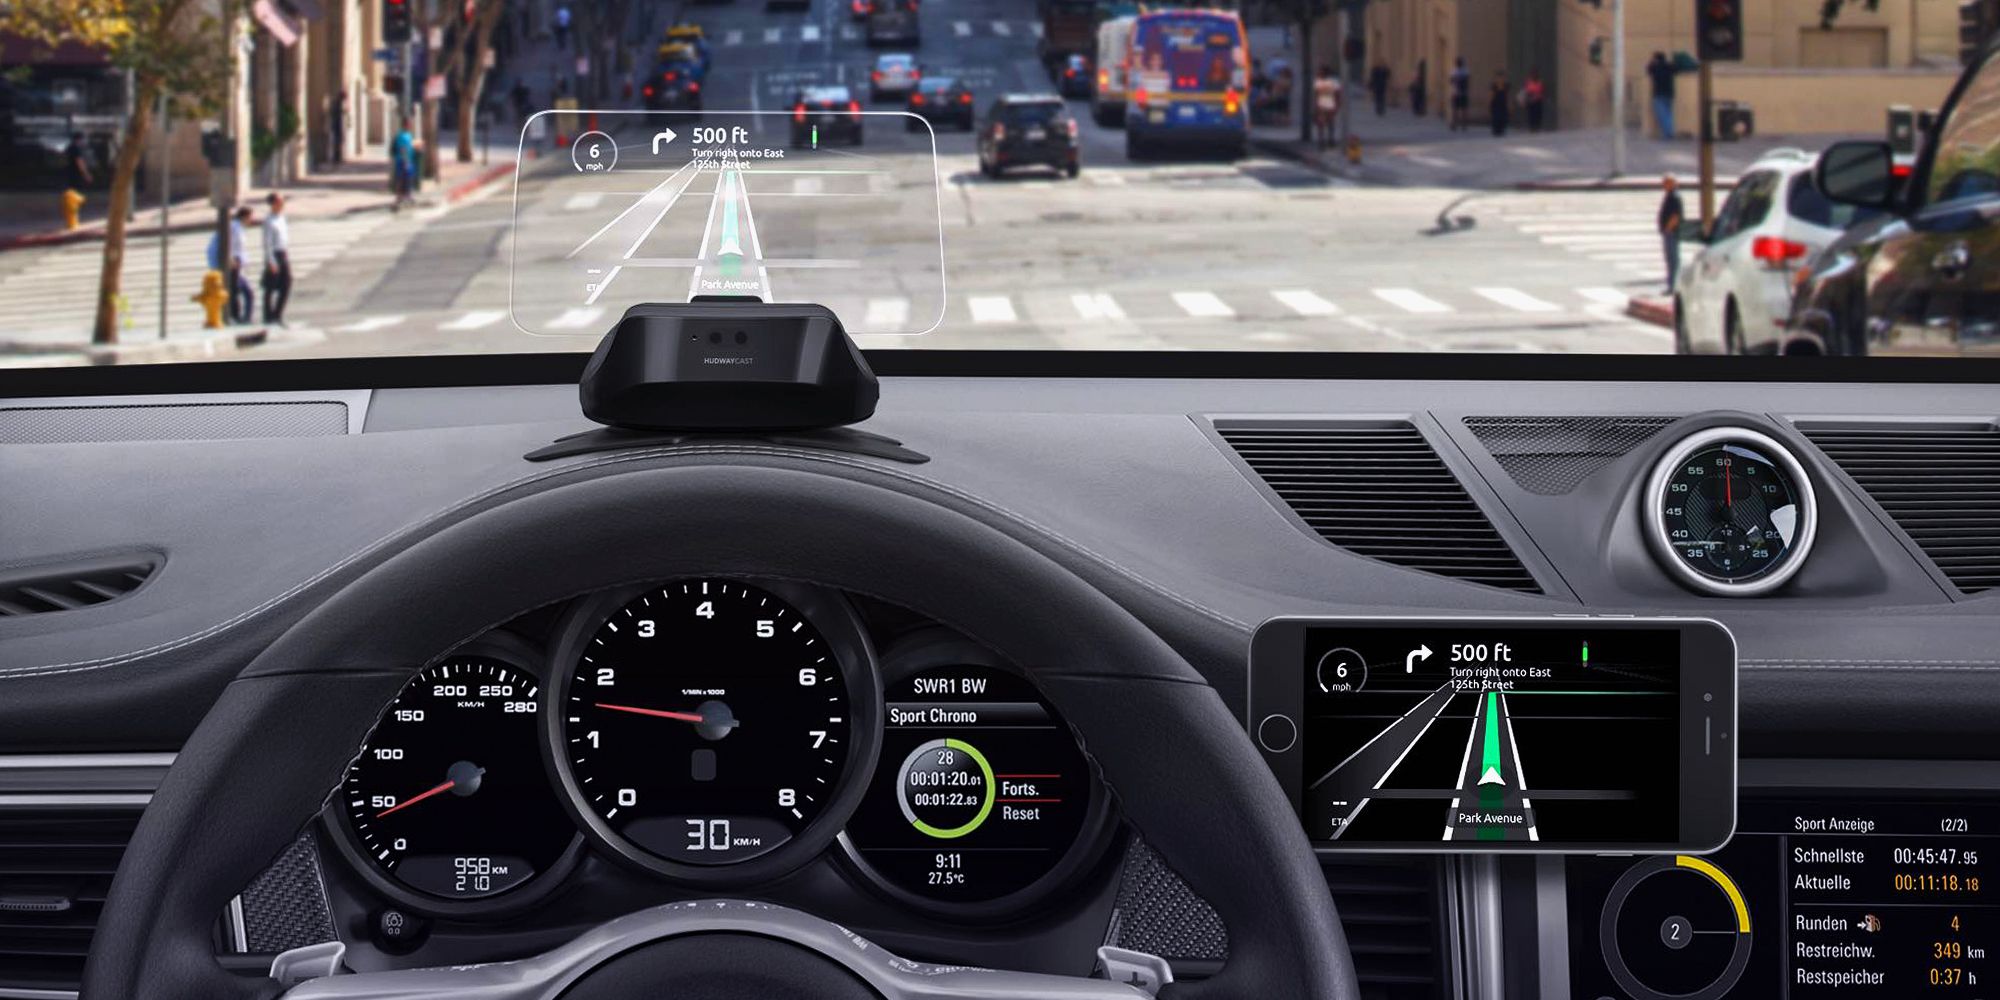 10 Cool Car Gadgets to Modernize Your Wheels - Must-Have Car